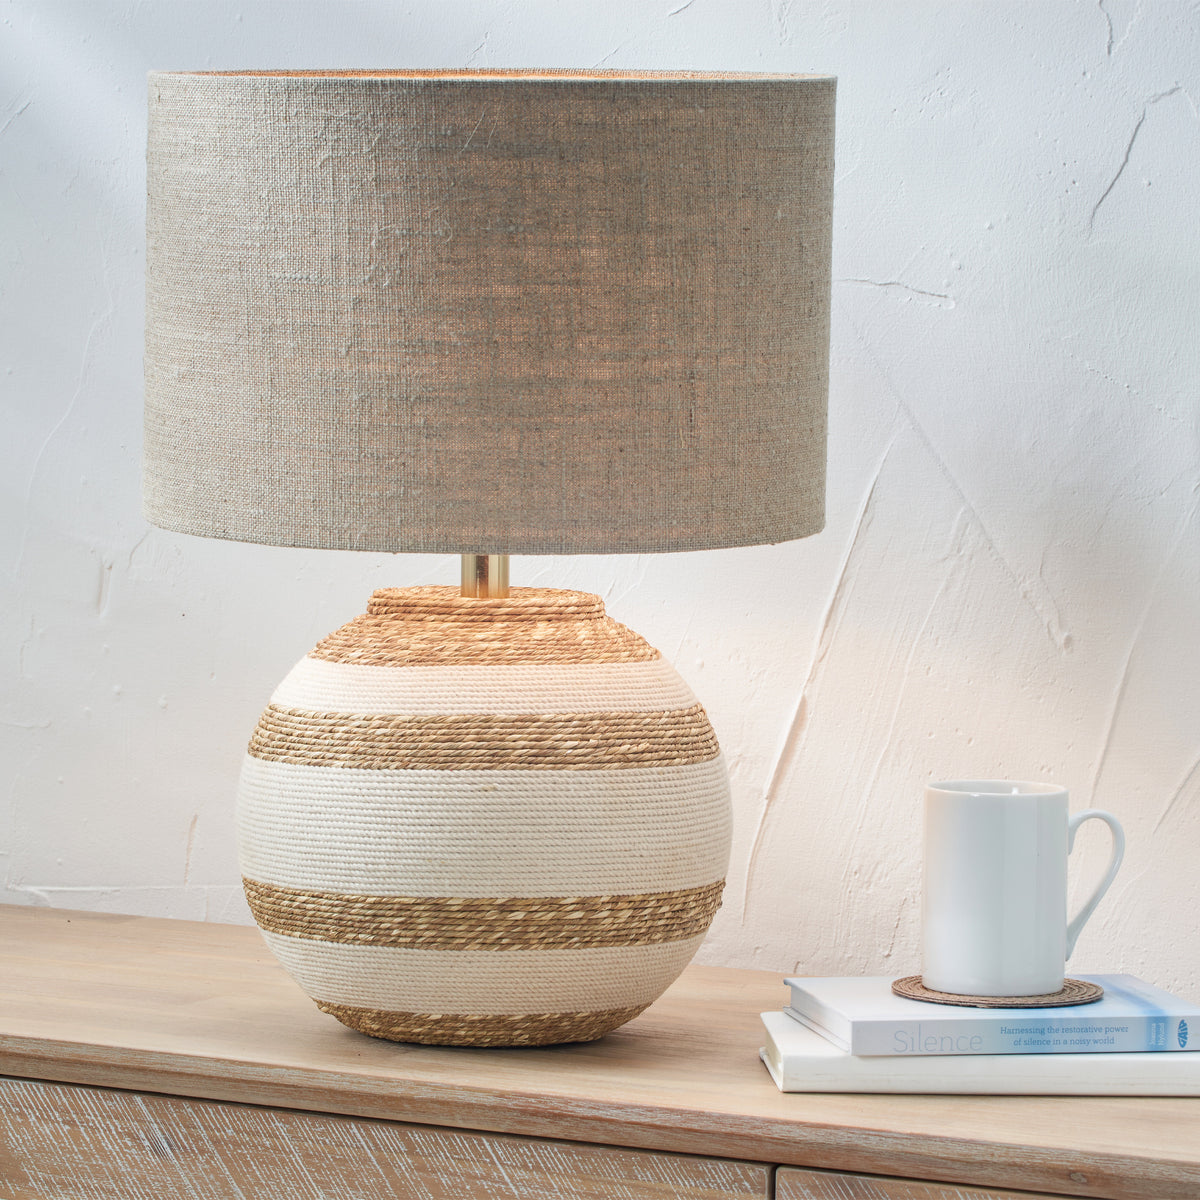 Talalla Cream and Natural Sea Grass Round Table Lamp for bedroom or living room